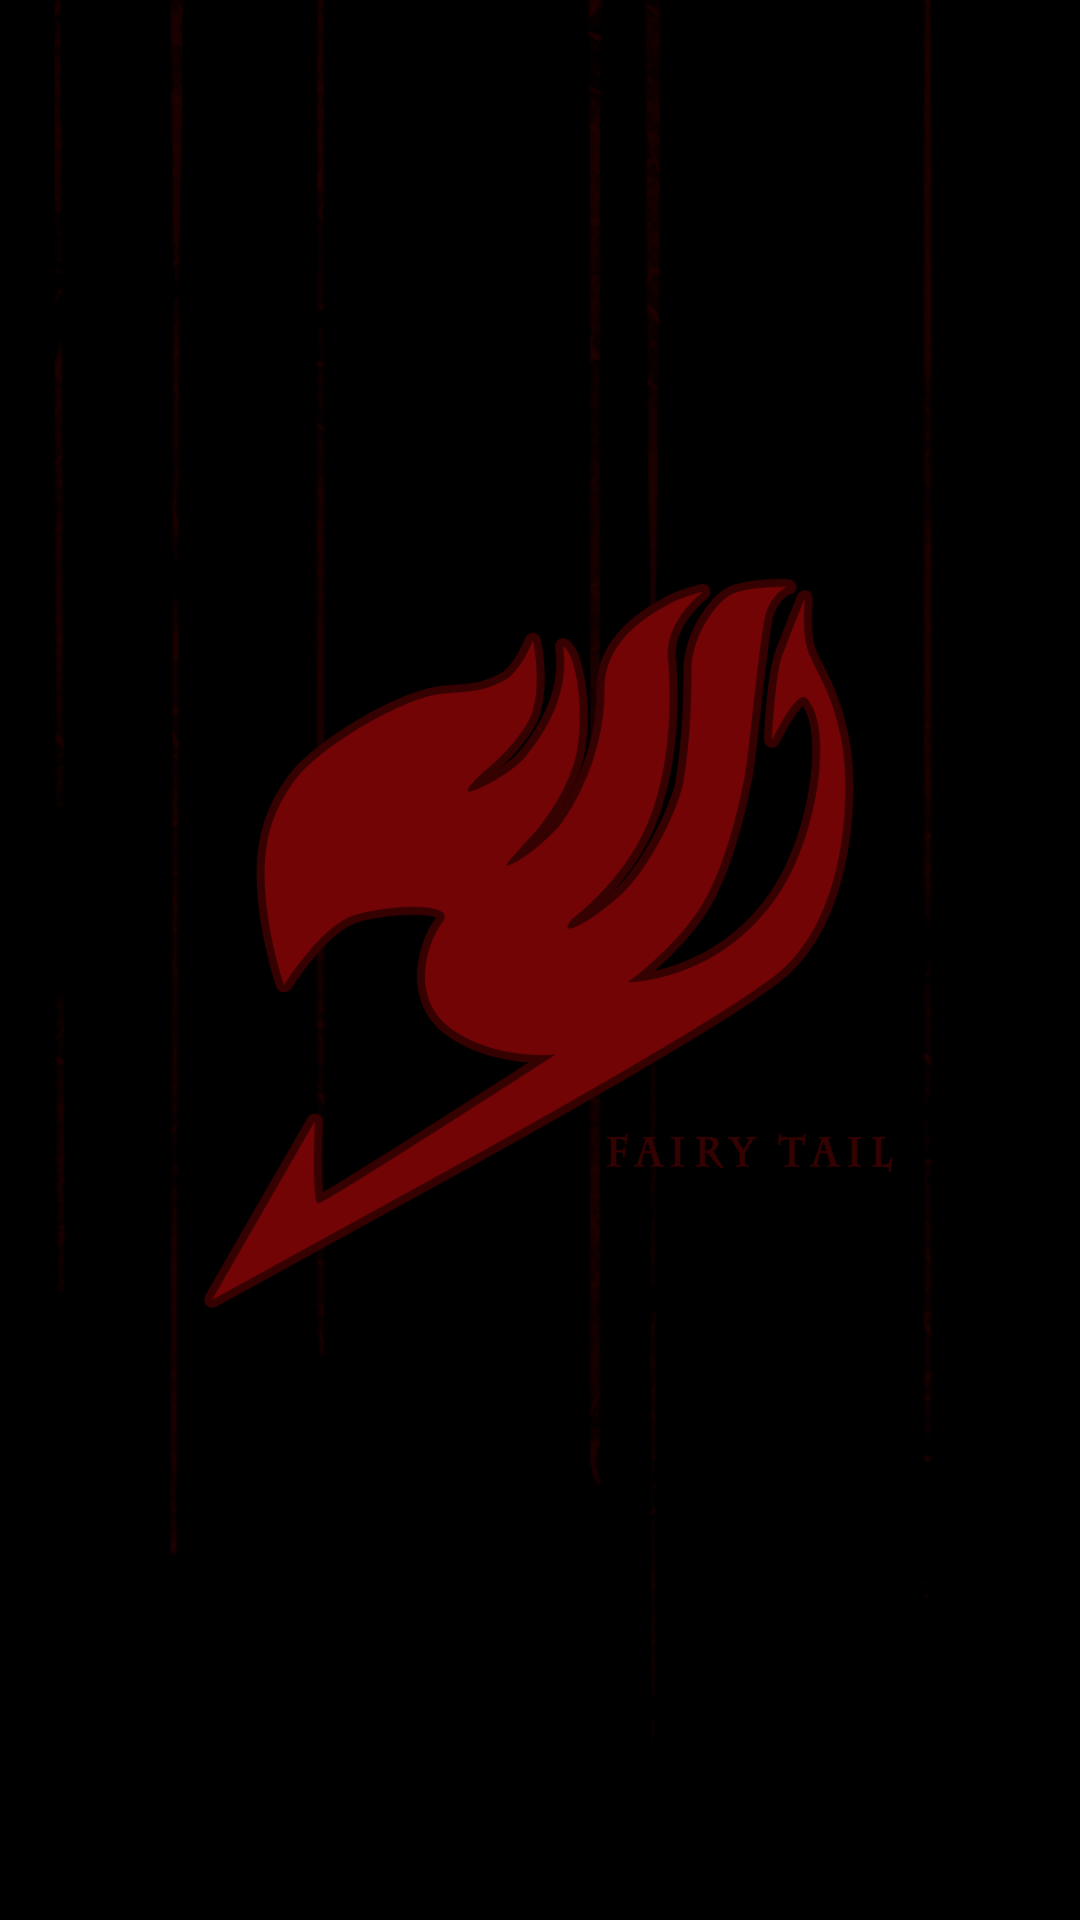 Télécharger photo fairy tail logo hd png